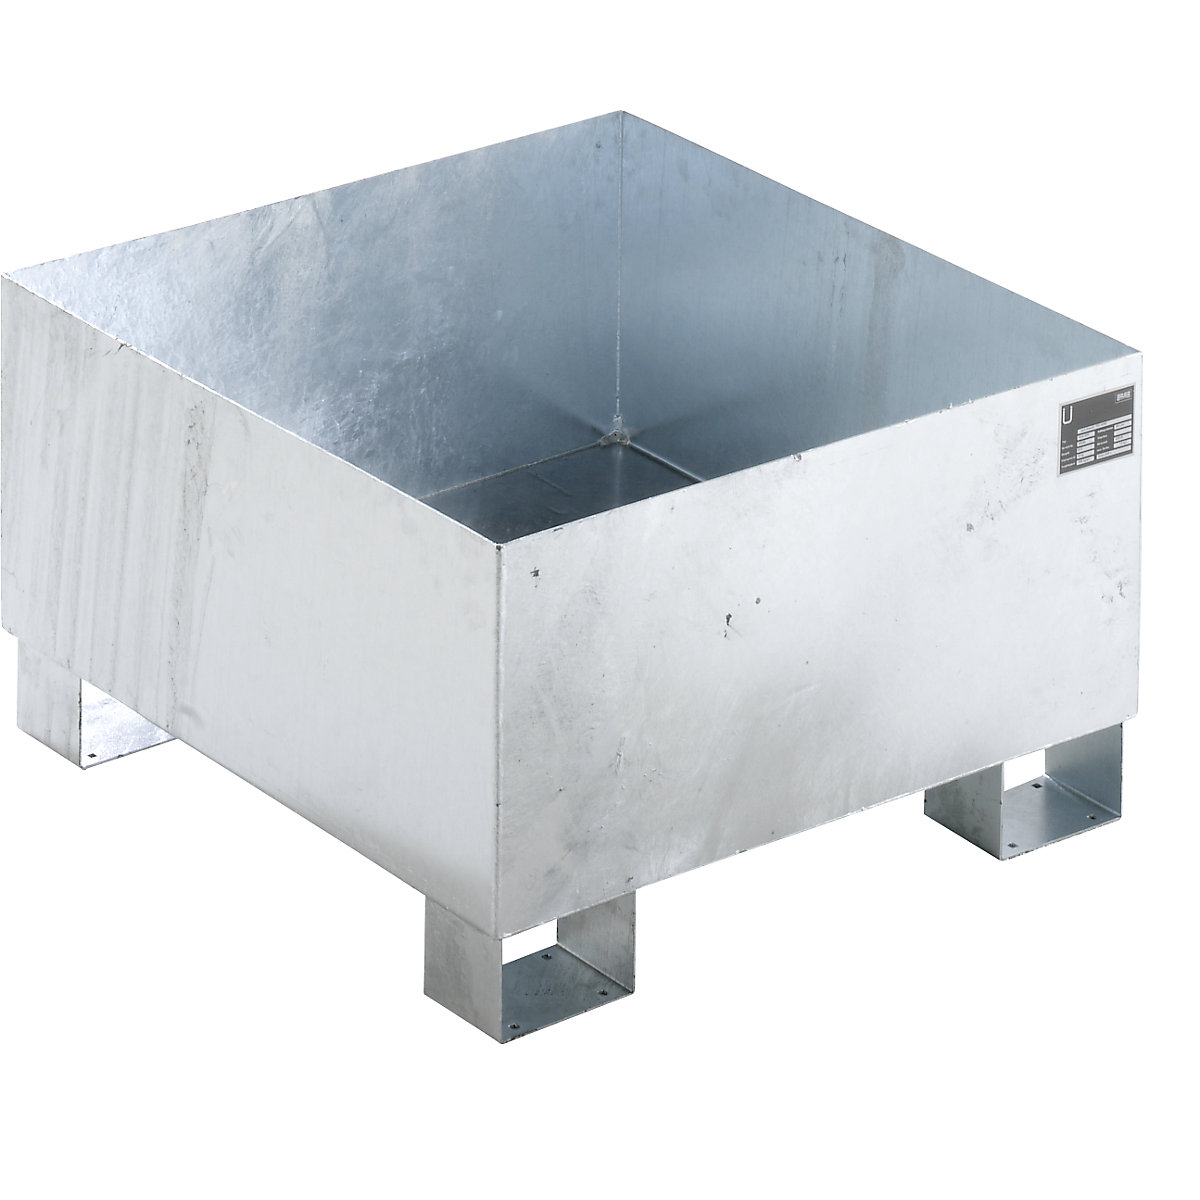 EUROKRAFTbasic – Sump tray made from sheet steel, LxWxH 800 x 800 x 465 mm, hot dip galvanised